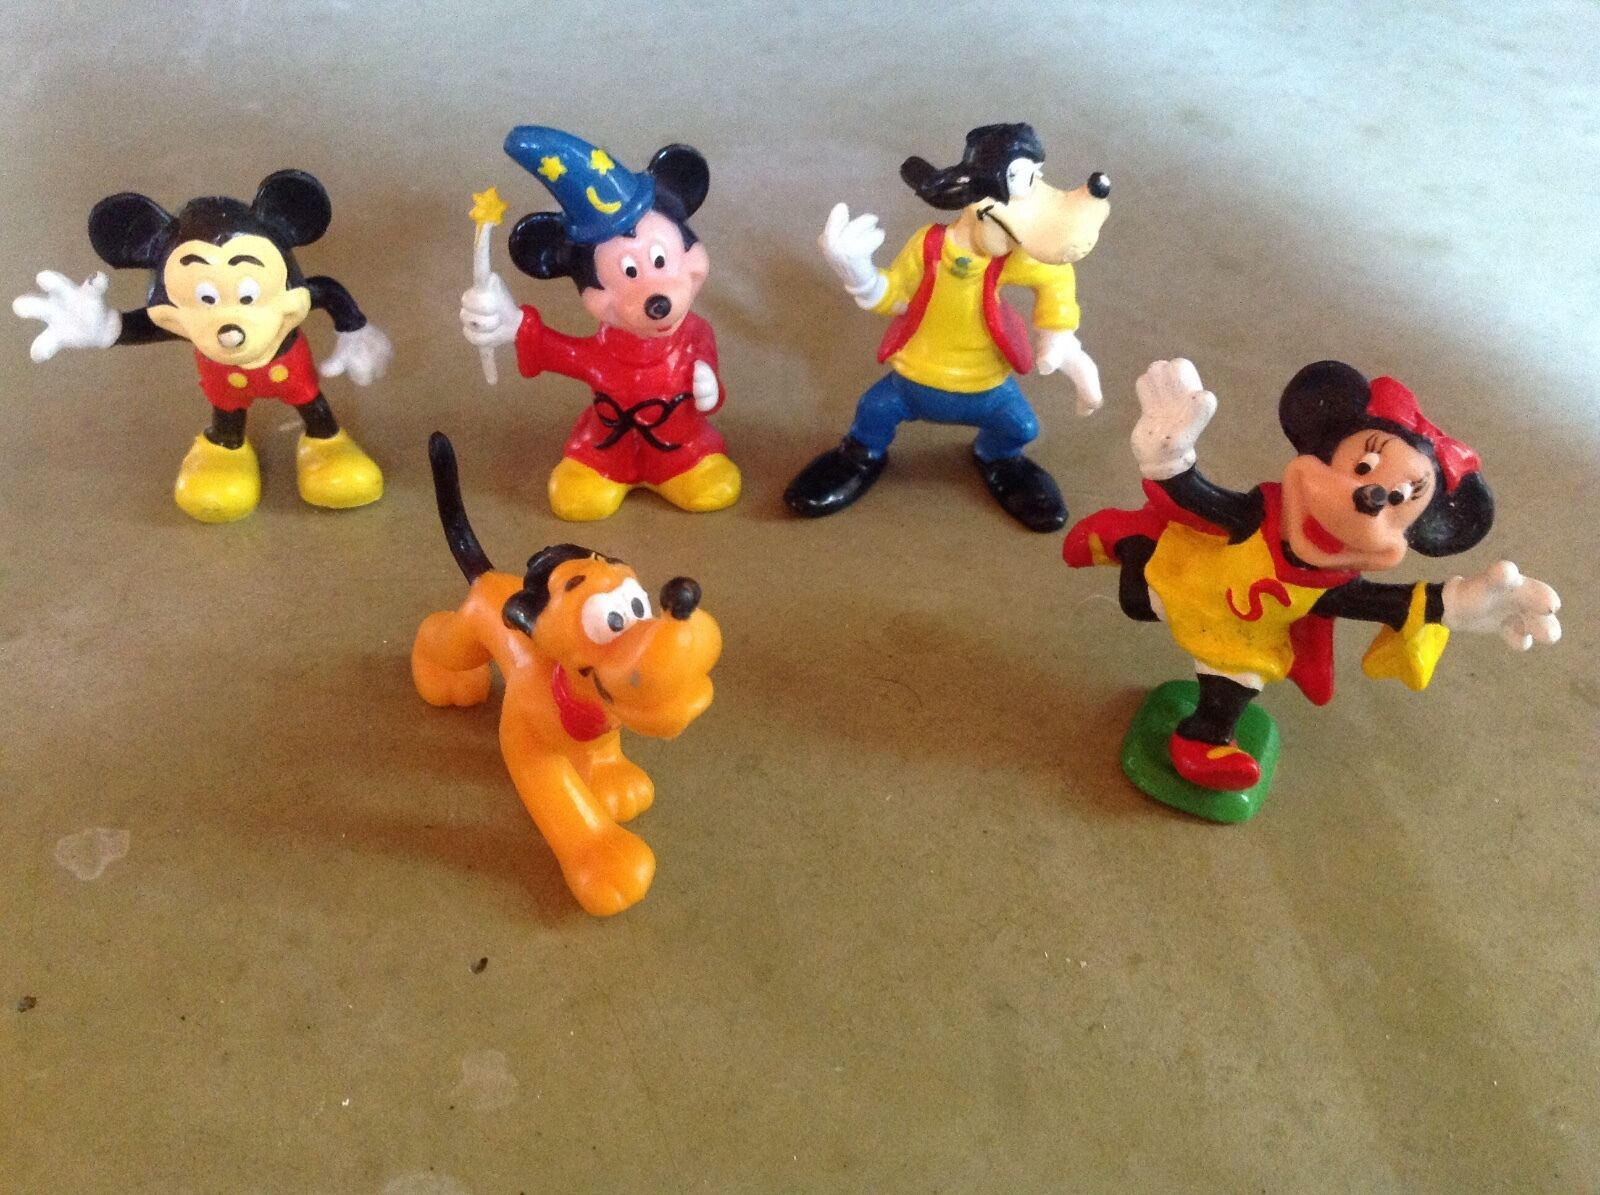 Set of 5 Collectible WALT DISNEY PROD Rubber Figures, Made in Hong Kong